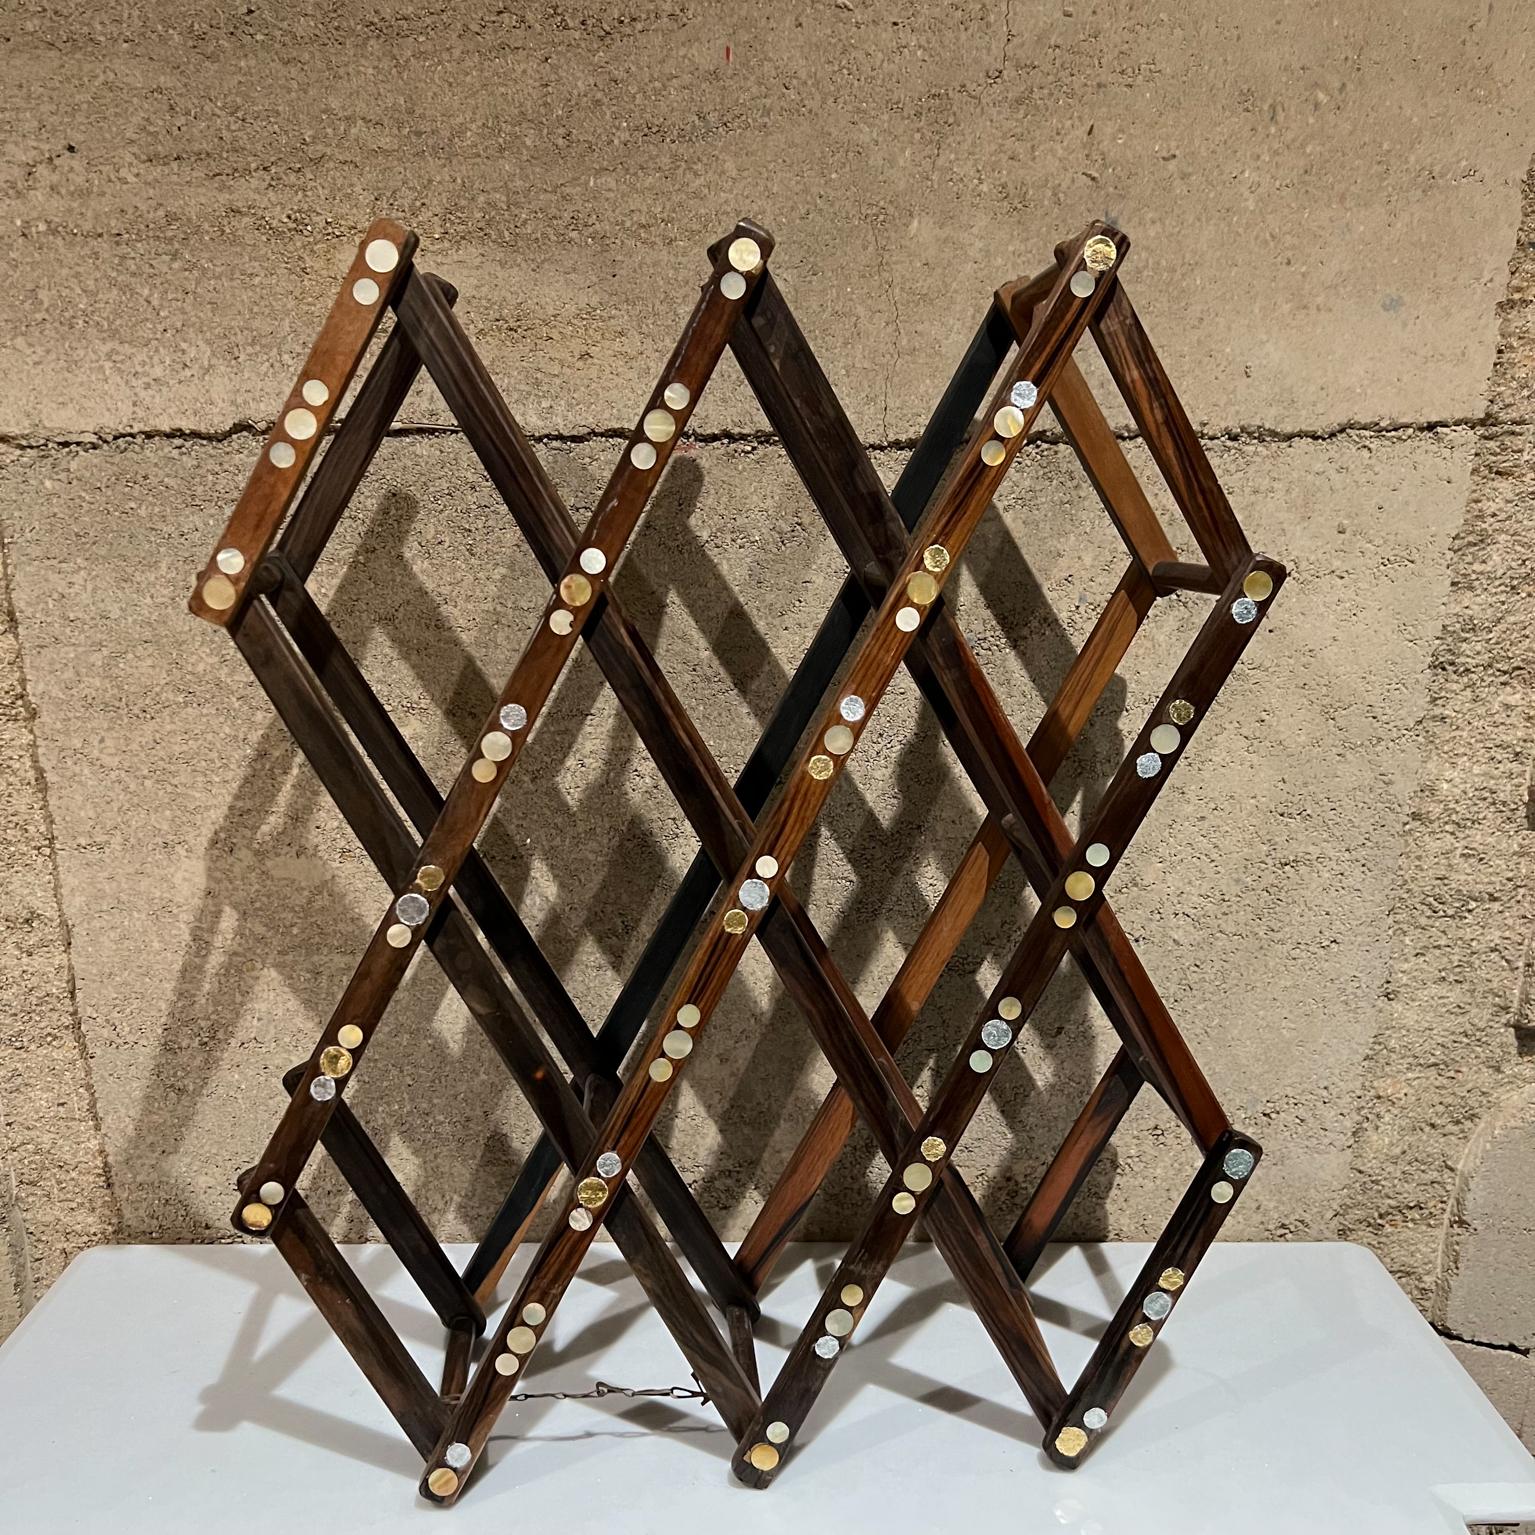 1970s Modern Accordion Ten Bottle Wine Rack in Rosewood and Abalone Shell For Sale 7